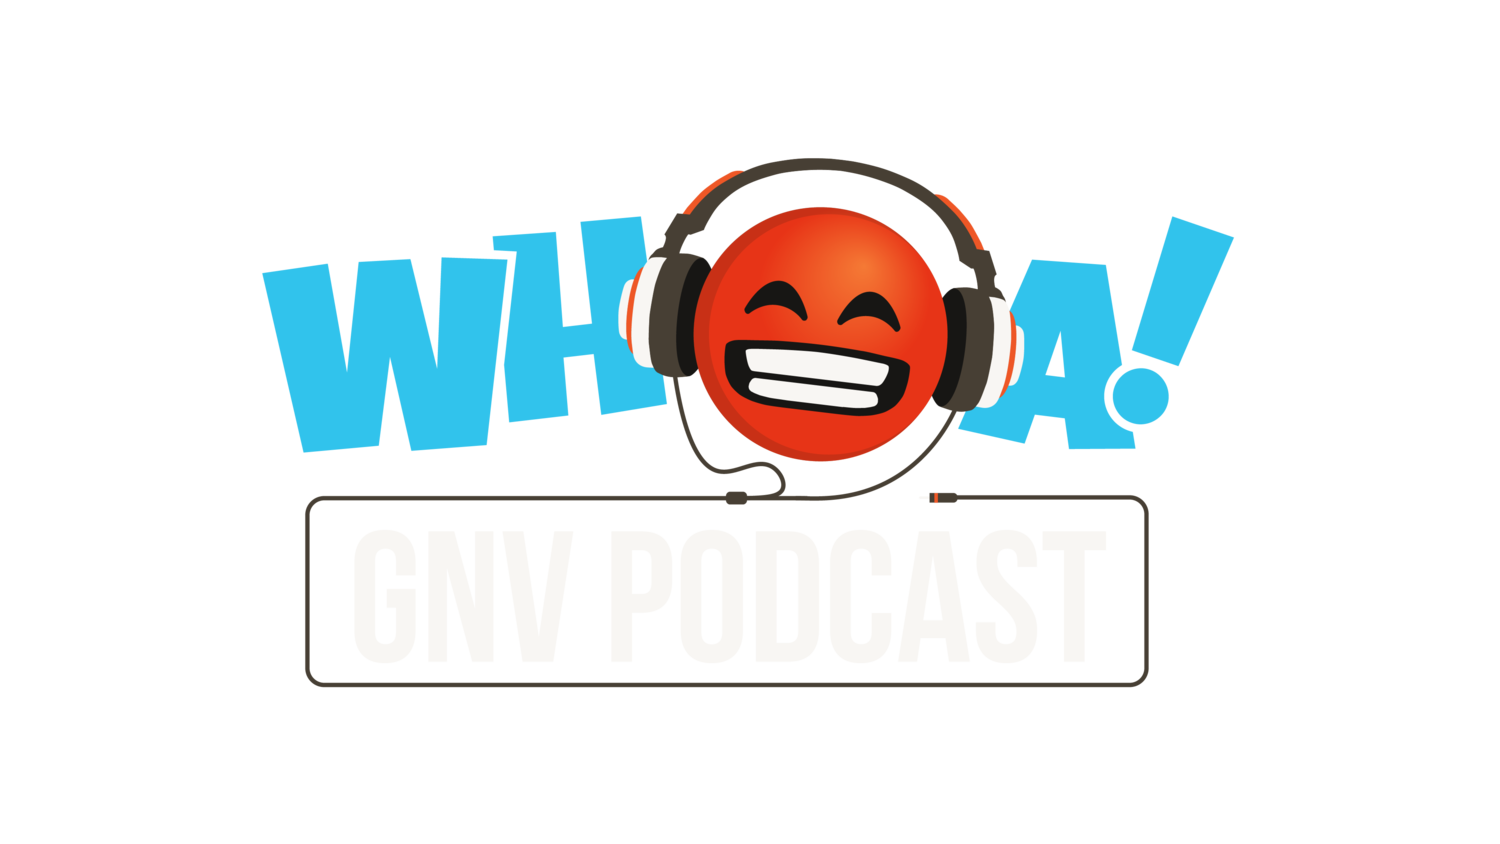 WHOA GNV Podcast, Gainesville, Florida's Podcast